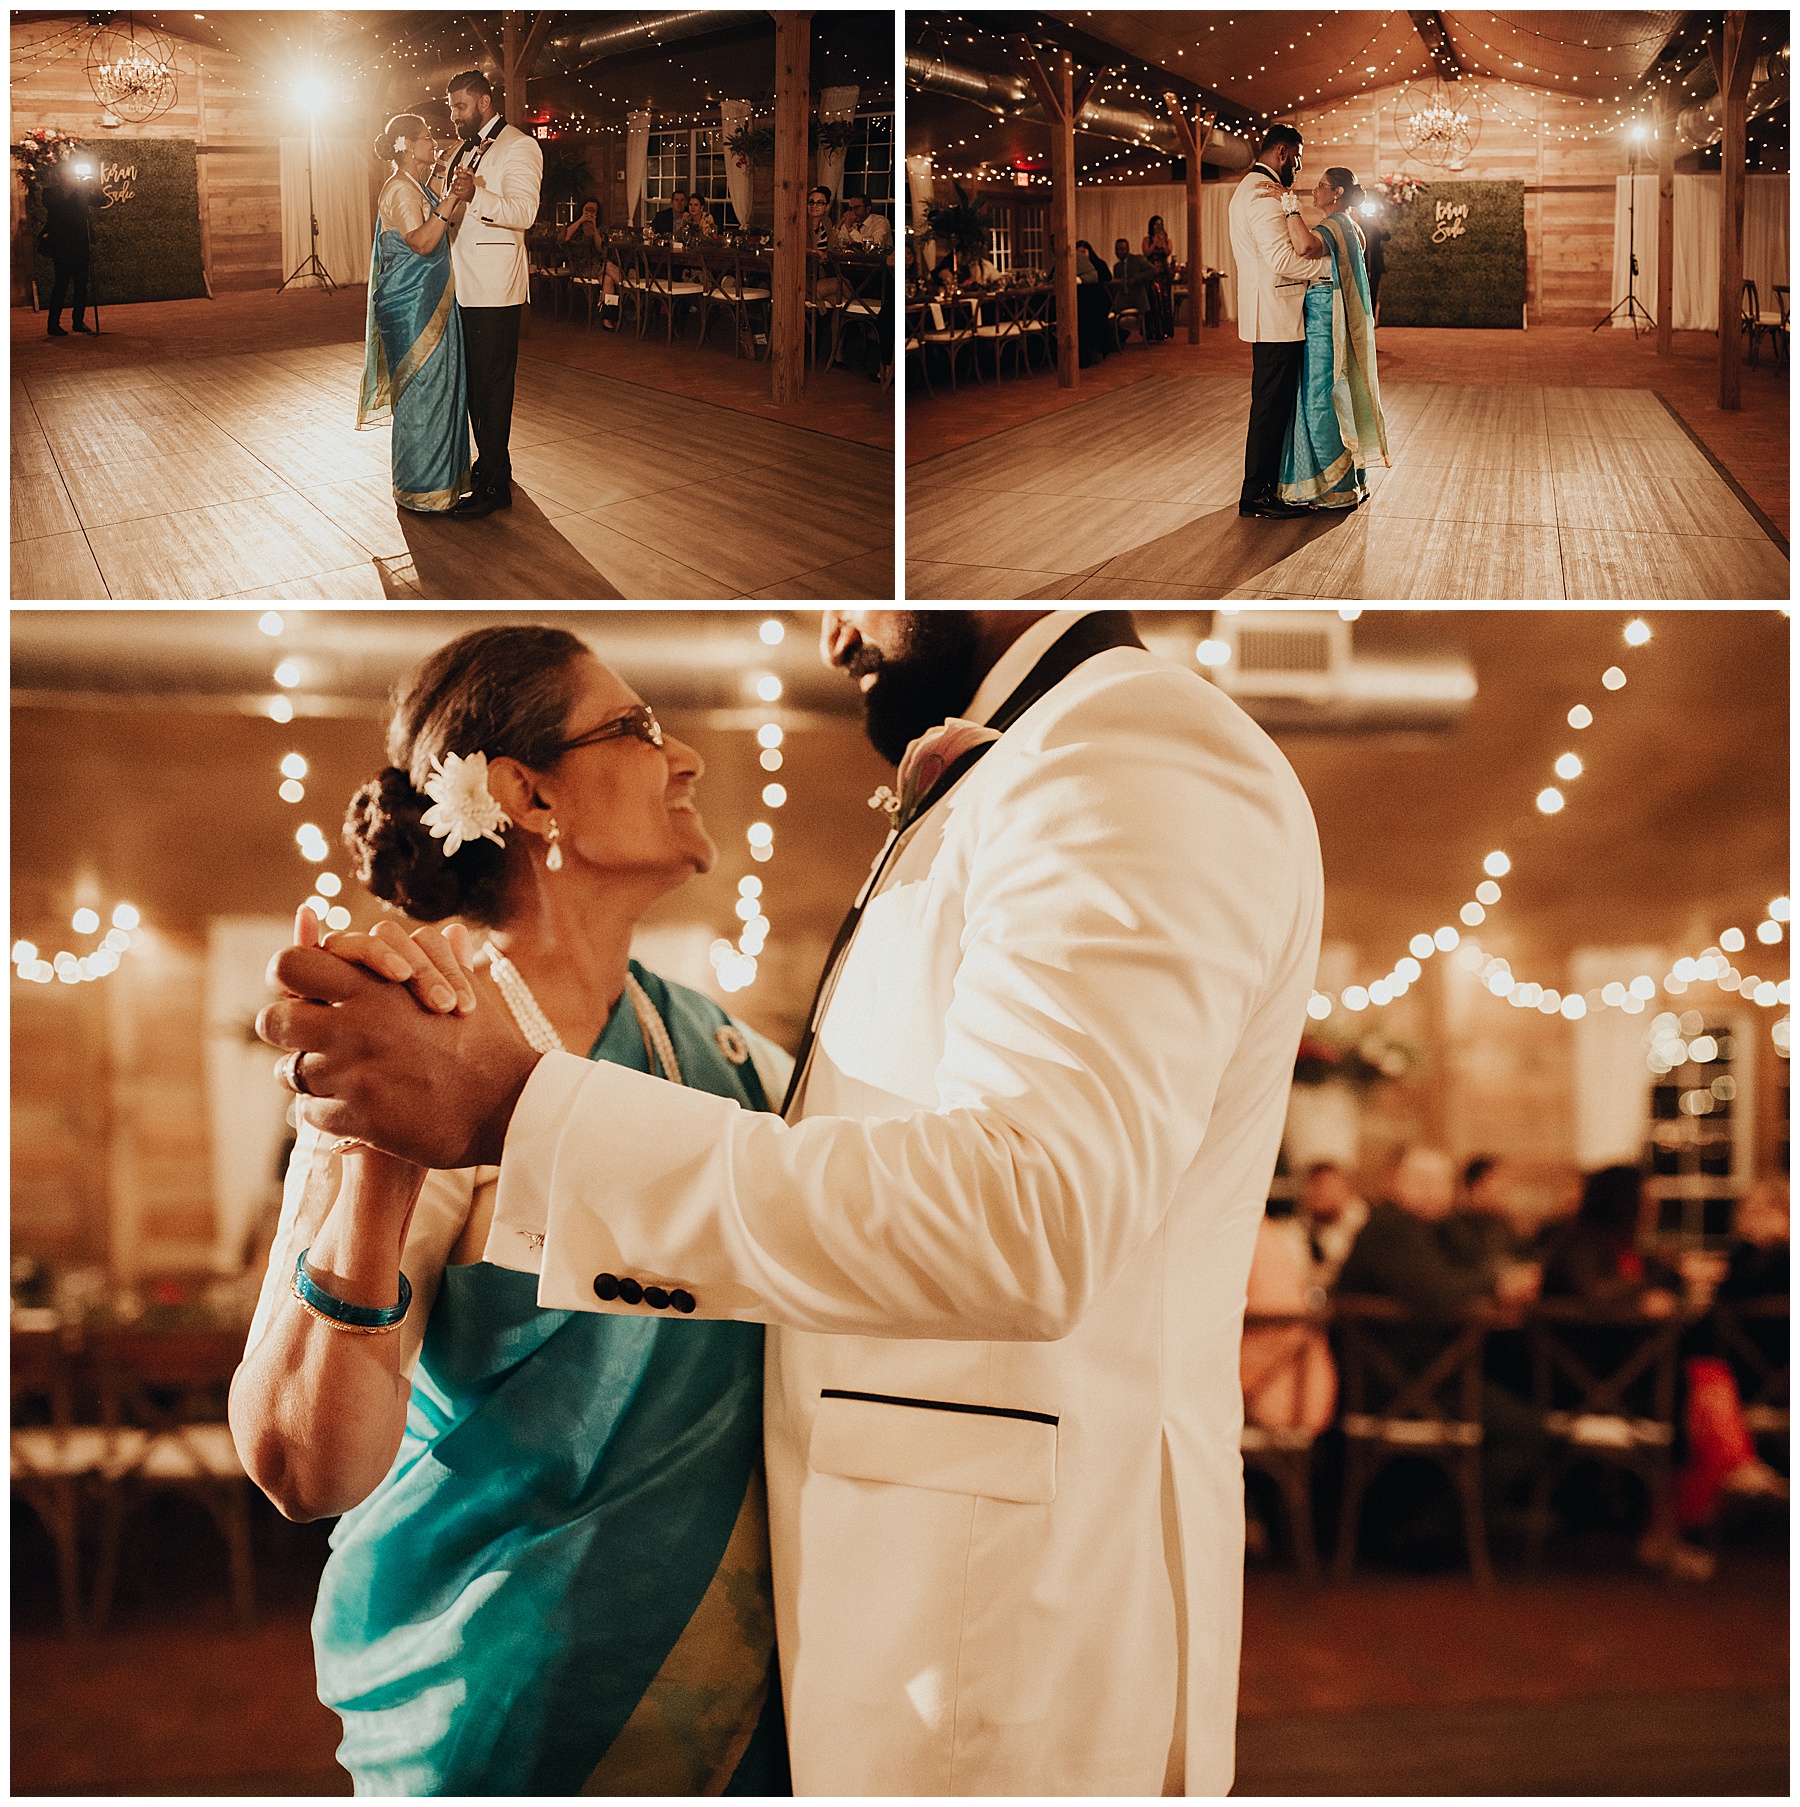 Multi cultural wedding at Cross Creek Ranch, in Dover Florida - Photographed by Juju Photography - Destination wedding photographer